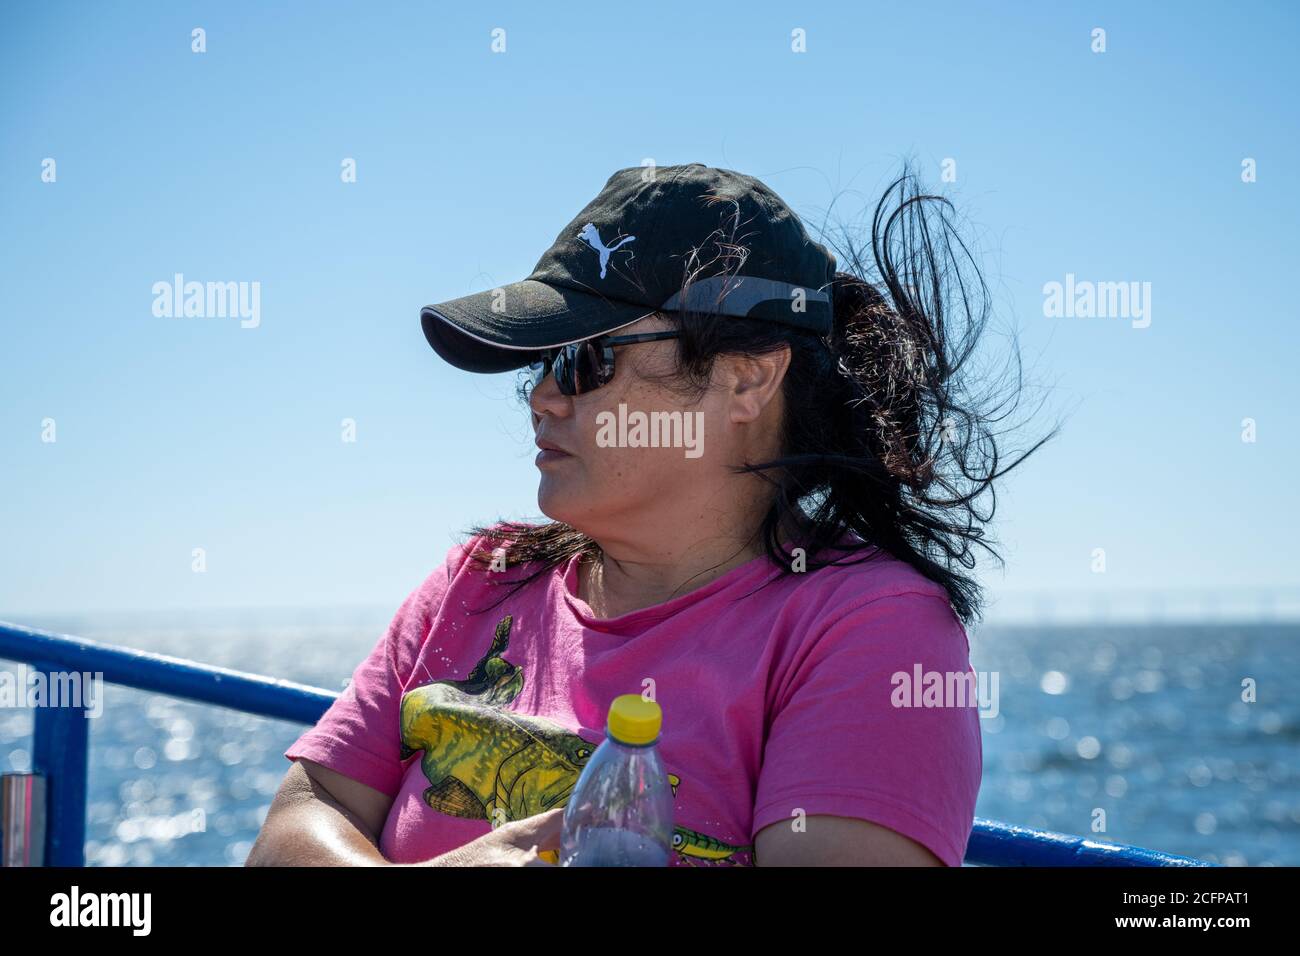 Malmo, Sweden - August 6, 2020: A middle-aged Asian woman on a boat trip a hot summer day. Bright blue sky and ocean in the background Stock Photo